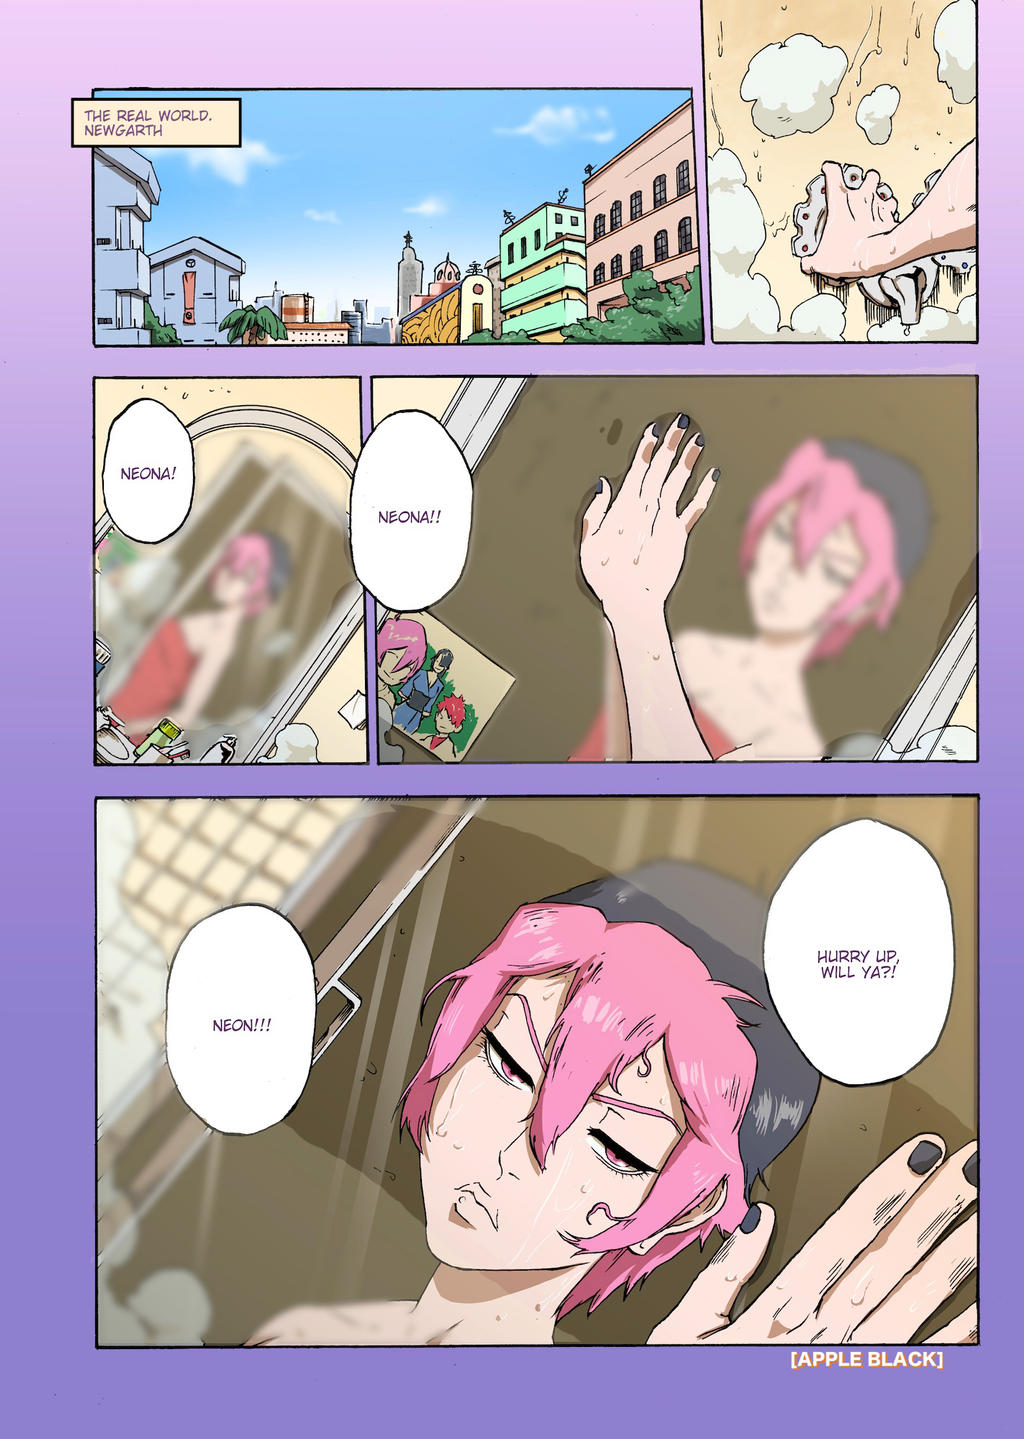 Apple Black Chapter 5, Page 1